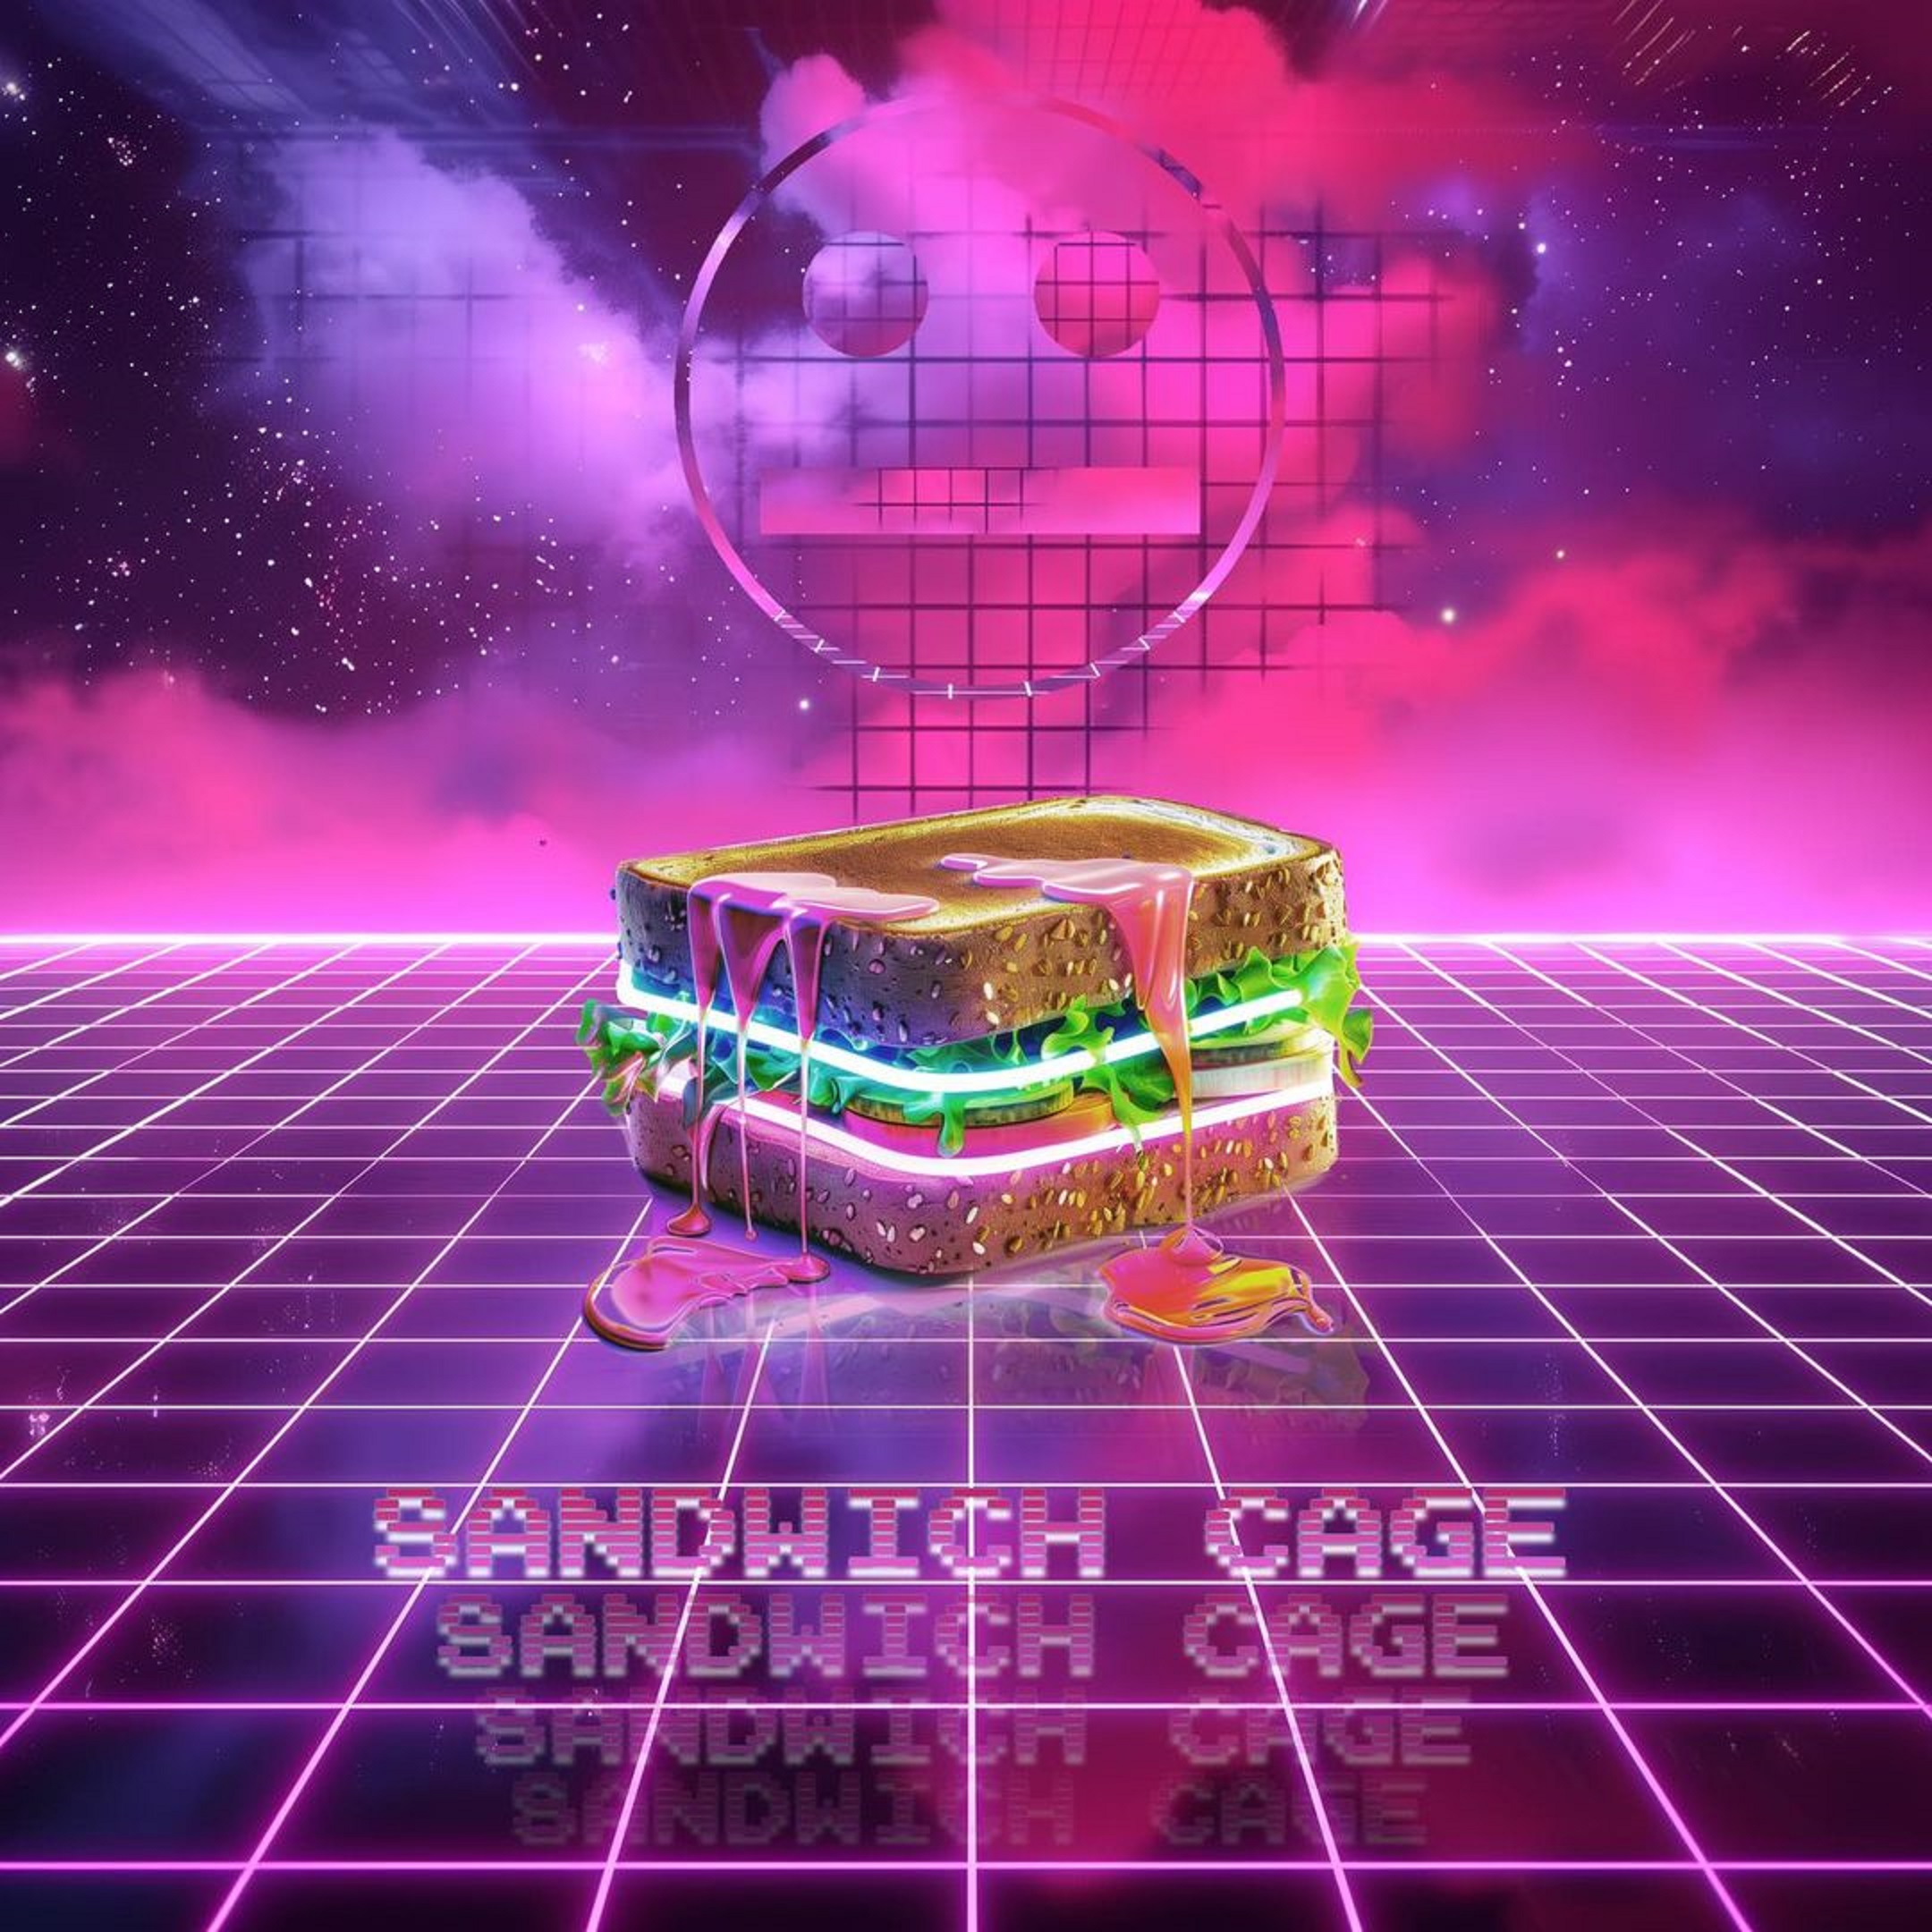 lespecial Releases Eclectic Mashup EP, SANDWICH CAGE